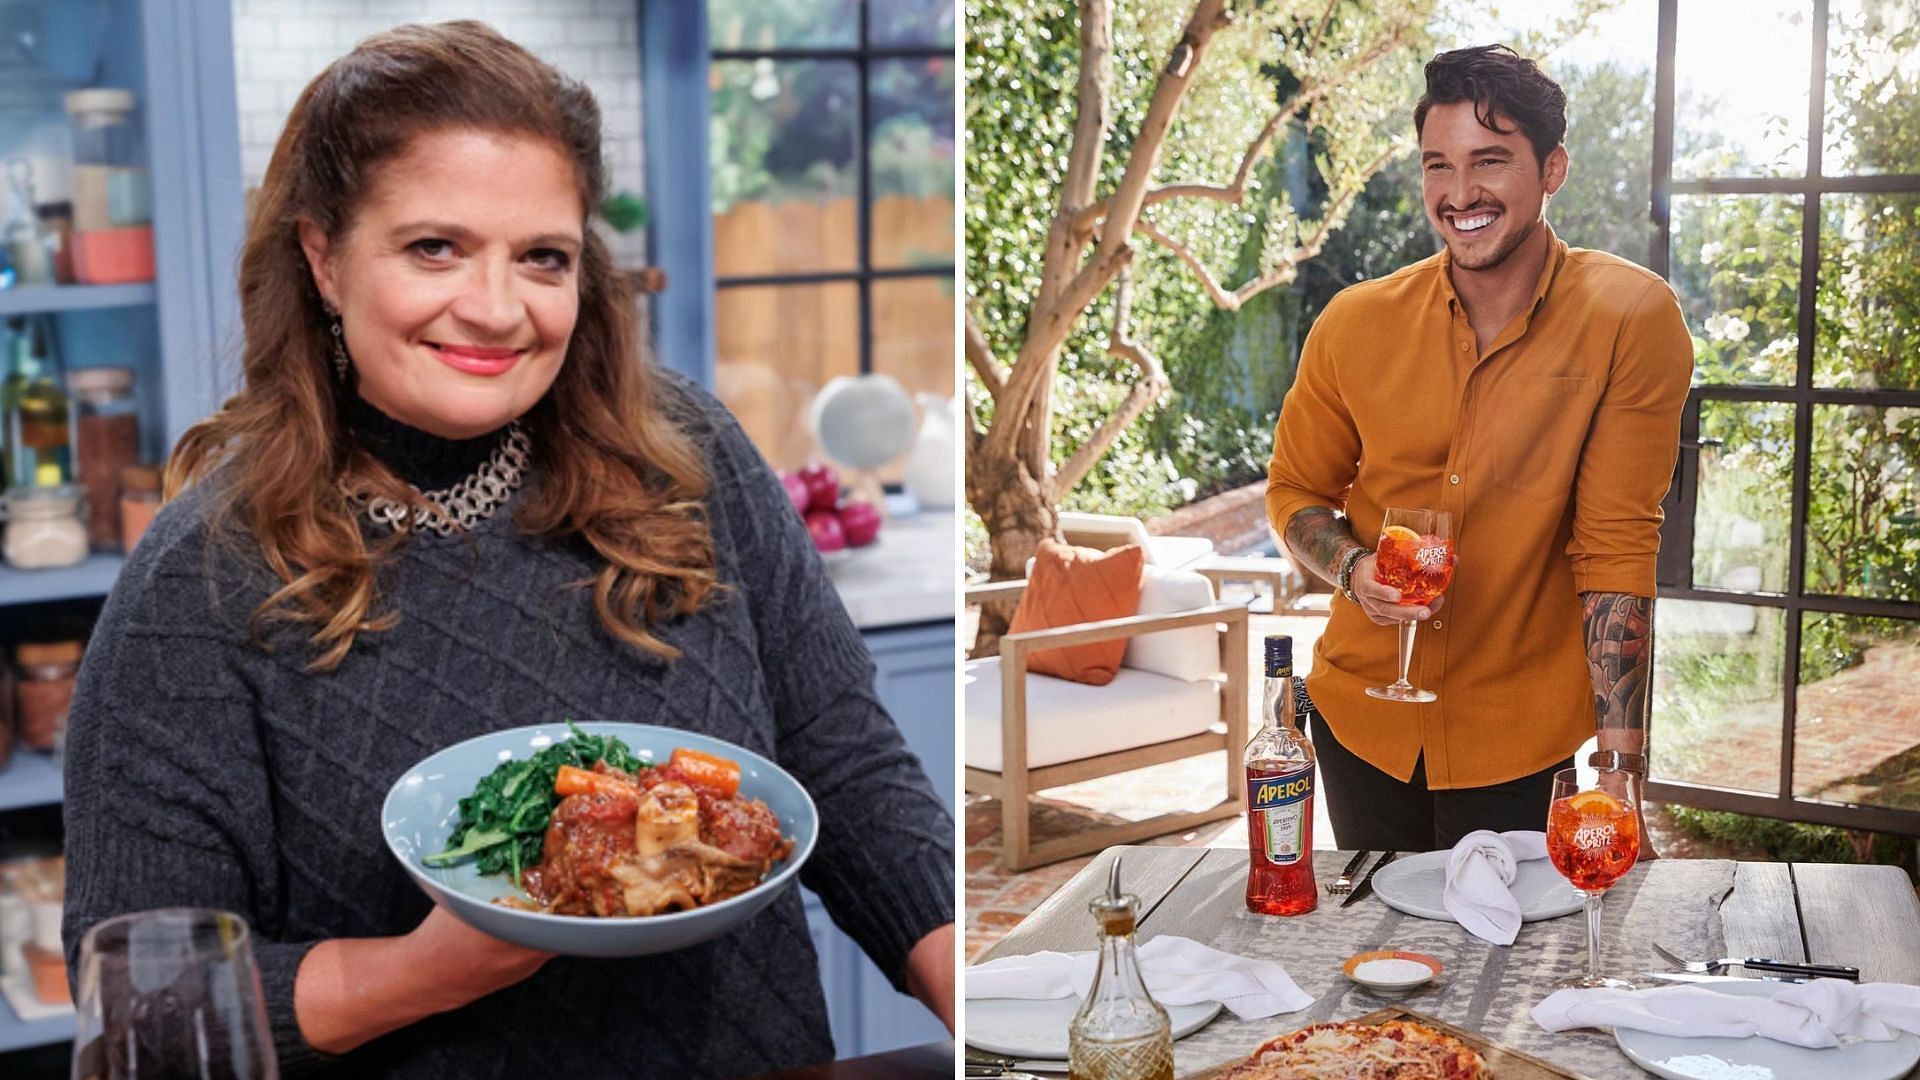 Ciao House season 1 is a brand new culinary competition on Food Network